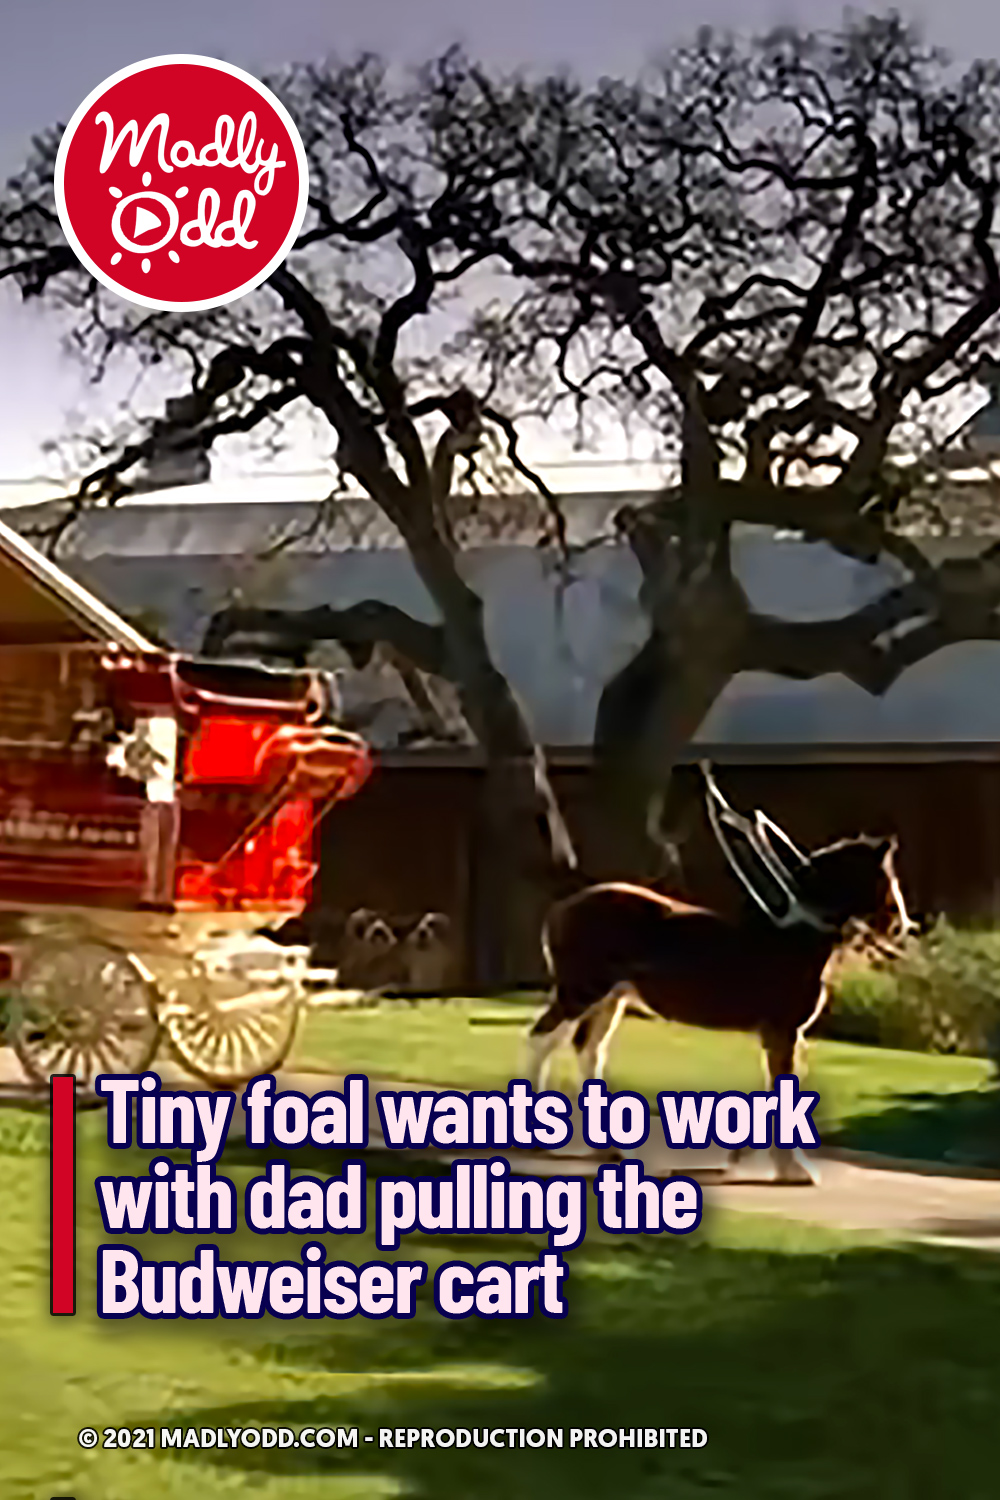 Tiny foal wants to work with dad pulling the Budweiser cart